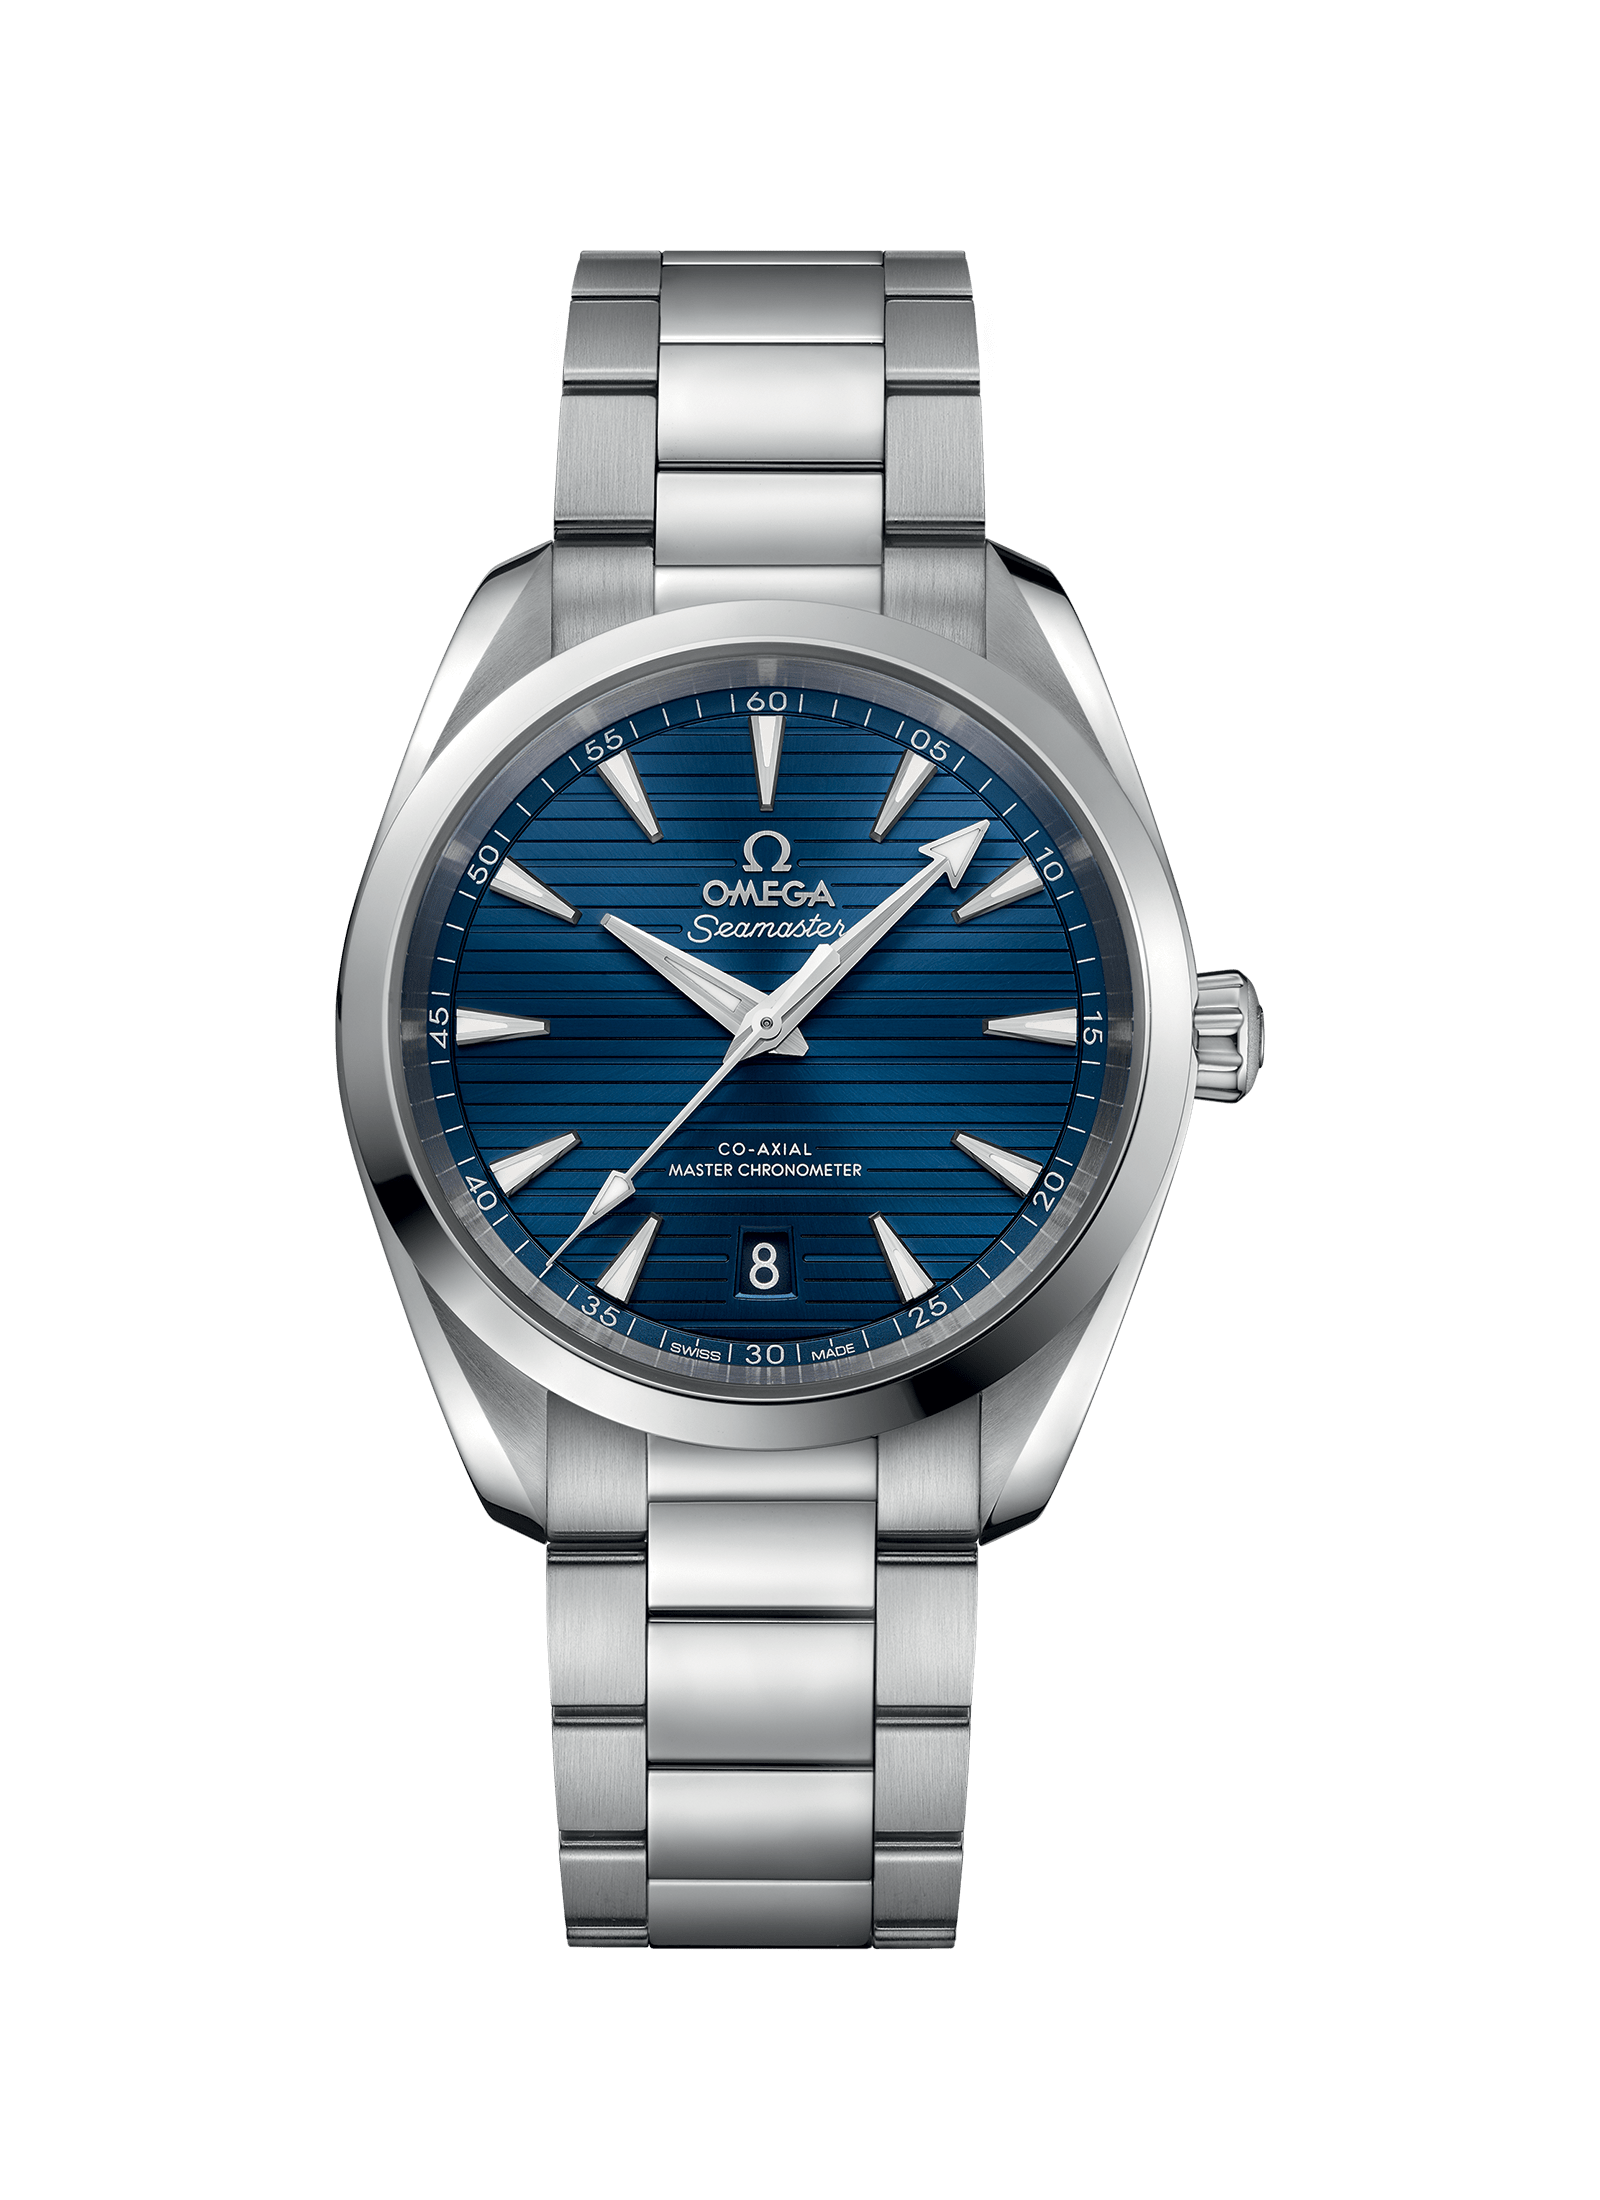 Downsizing: Six New Watches Under 40-mm from Top Brands | WatchTime - USA's   Watch Magazine